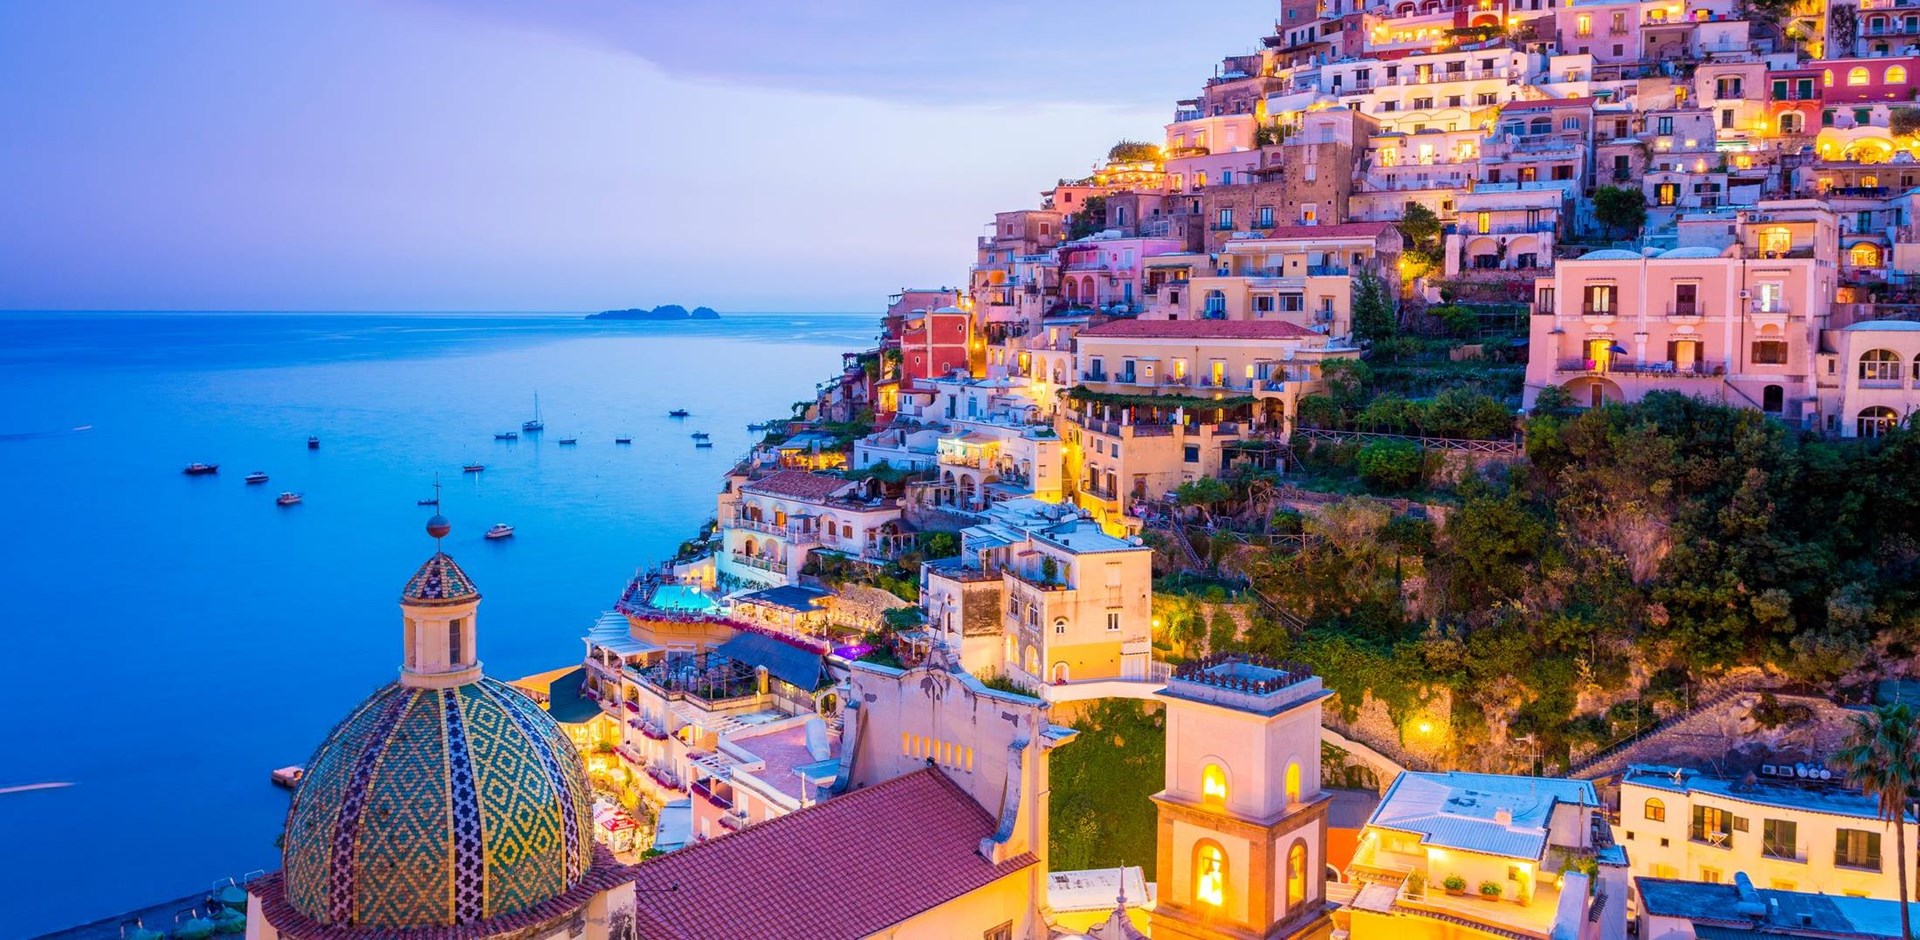 Positano, Amalfi Coast, Campania, Sorrento, Italy. View of the town and the seaside in a summer sunset; Shutterstock ID 376017433; PO: Citalia